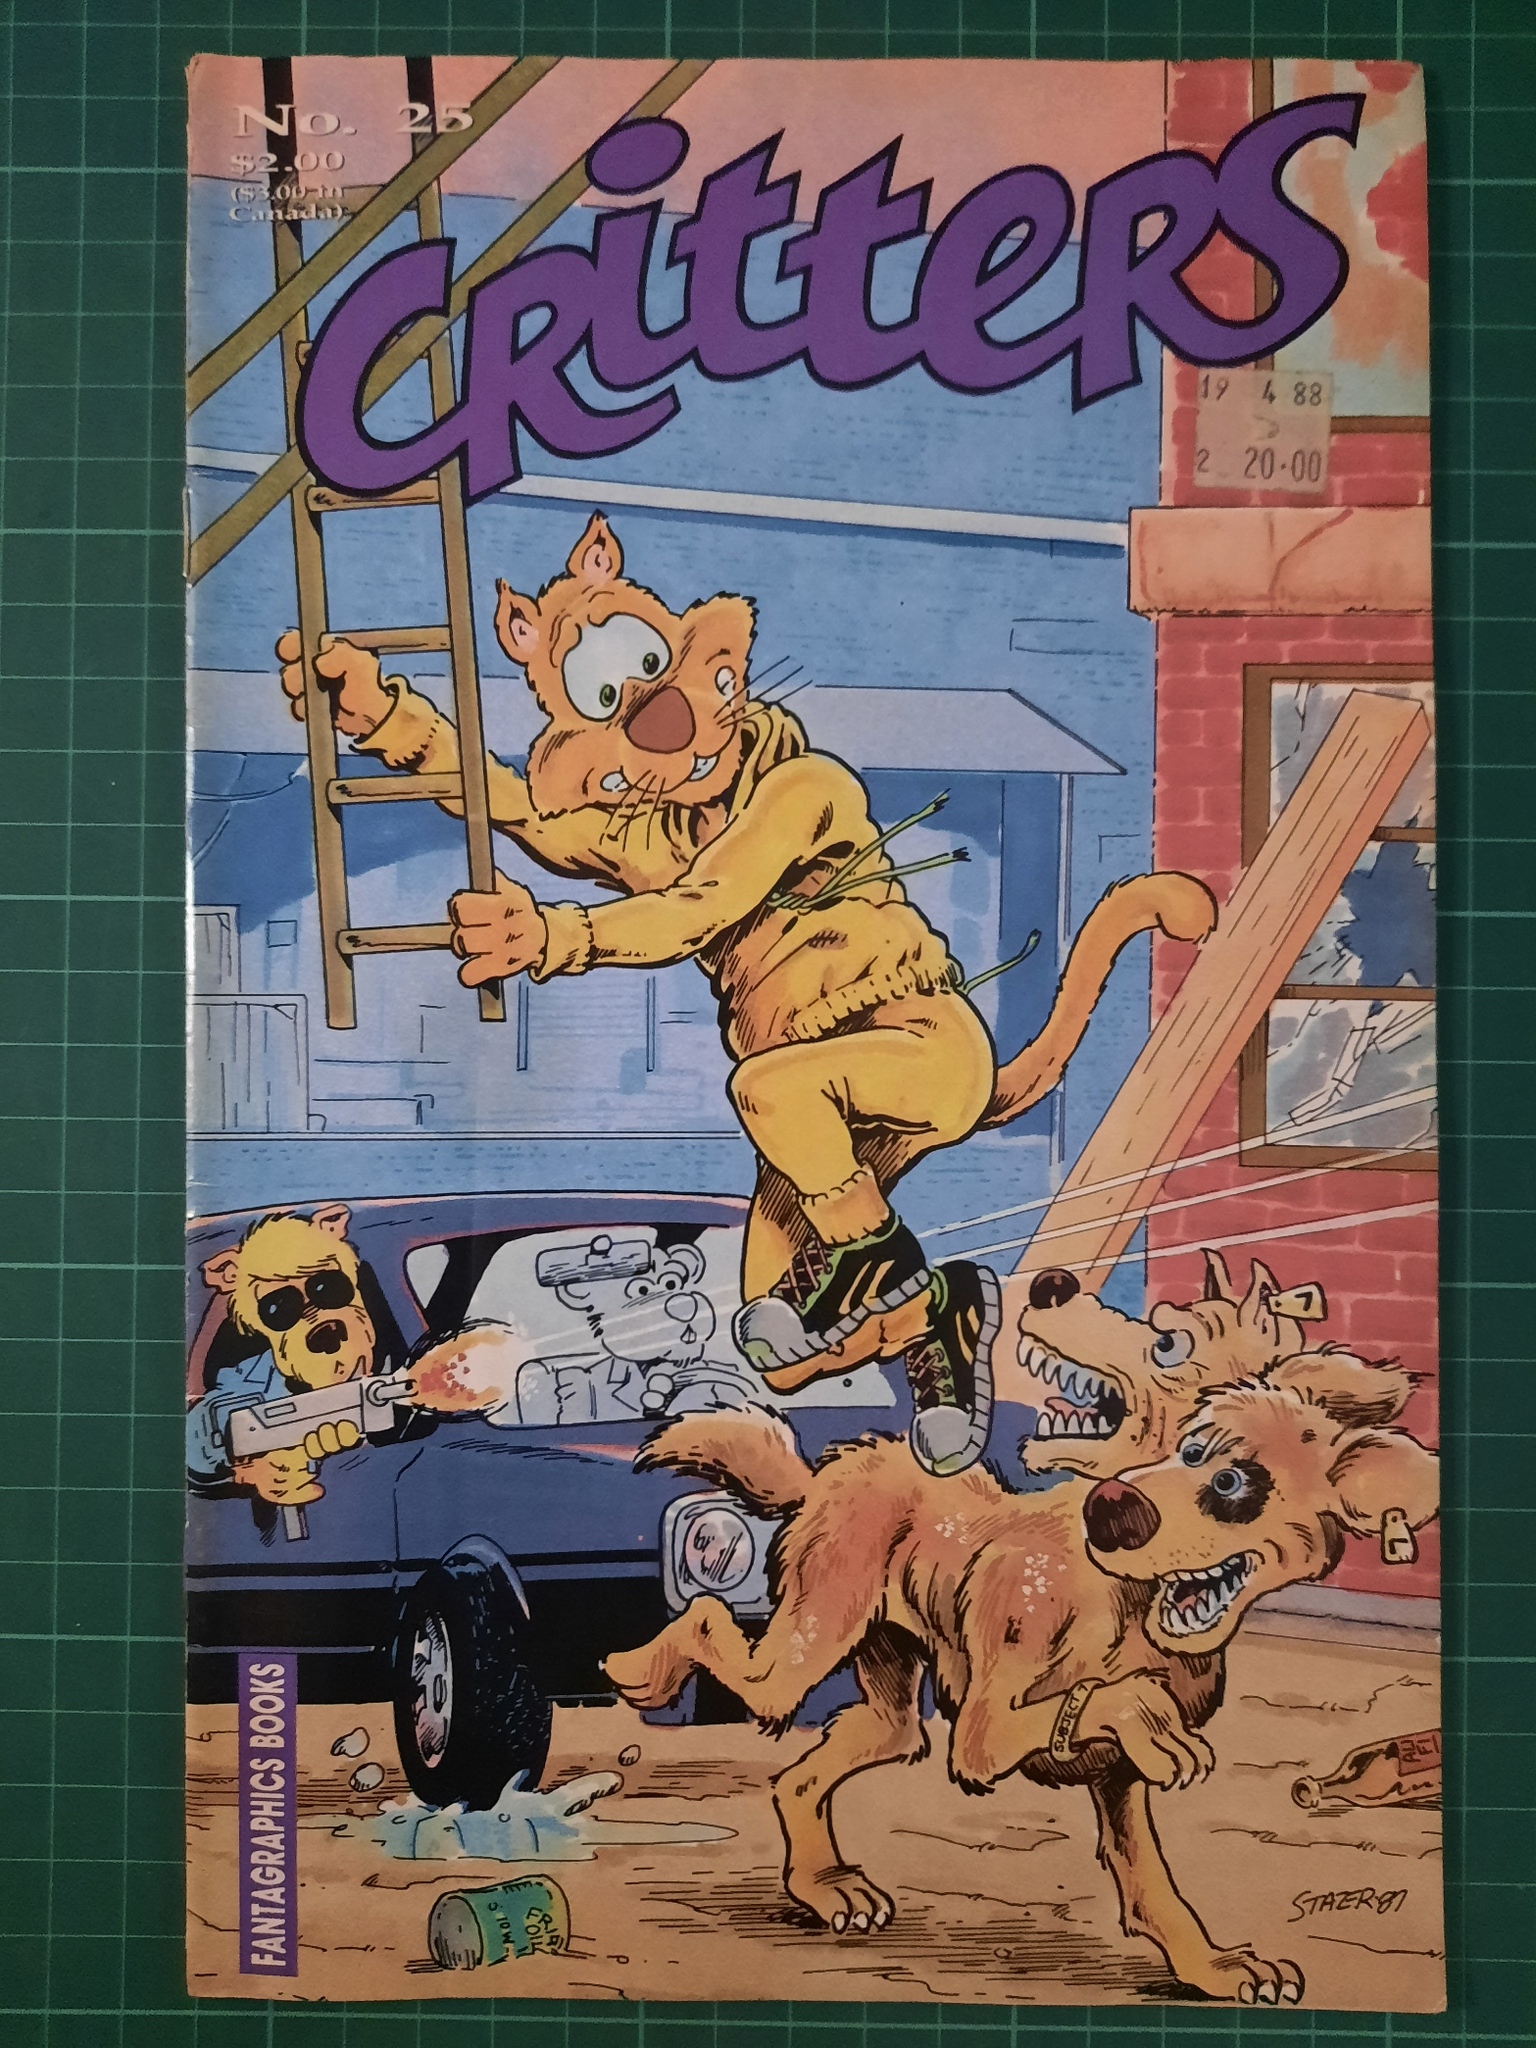 Critters #25